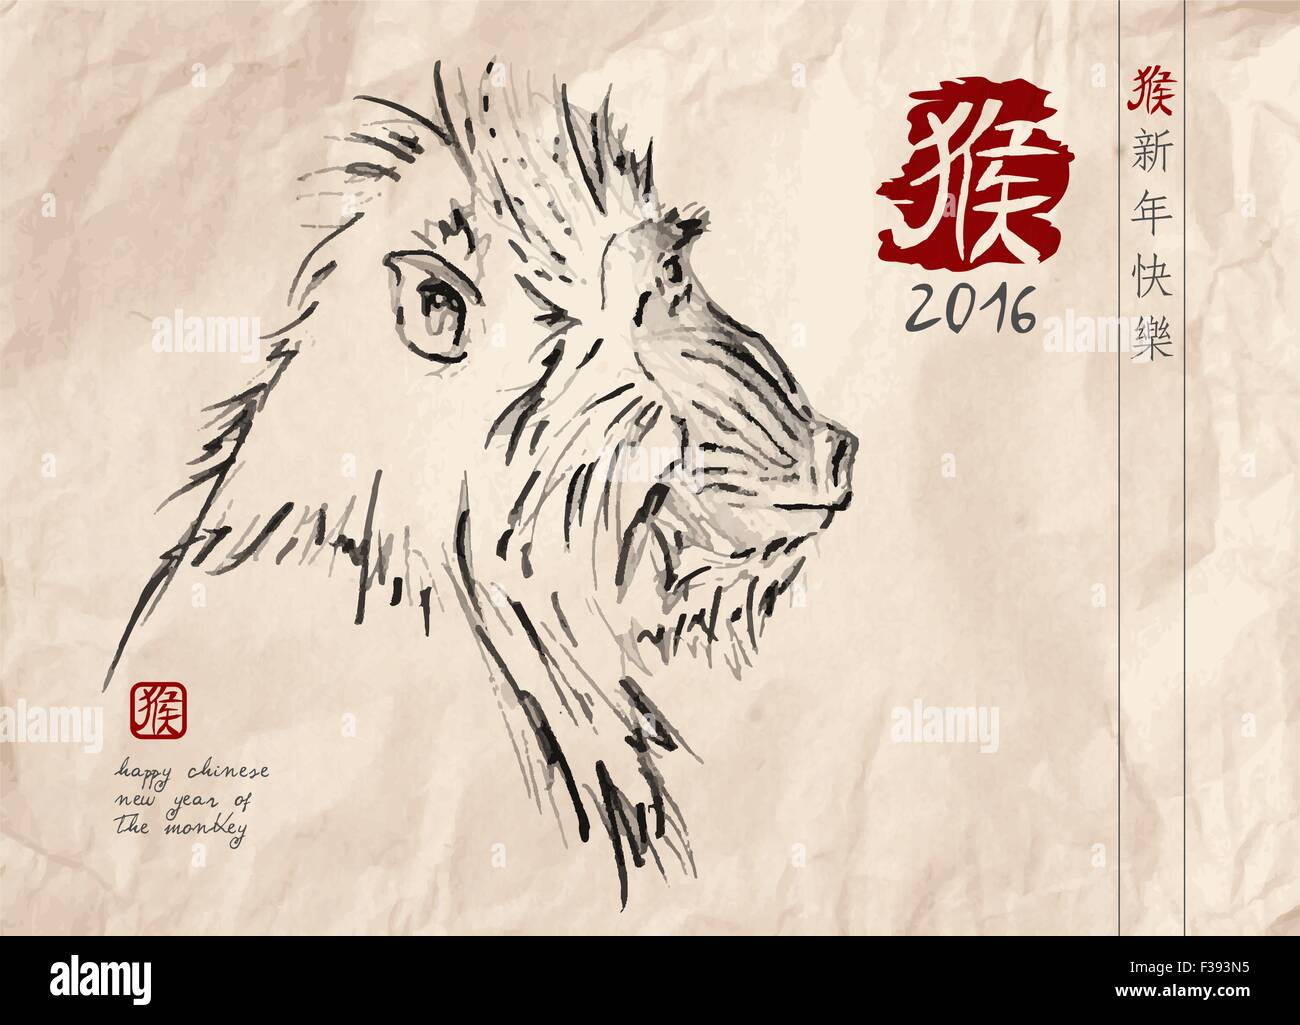 2016 Happy Chinese New Year of the Monkey hand drawn ape in traditional art style on textured paper. EPS10 vector. Stock Vector